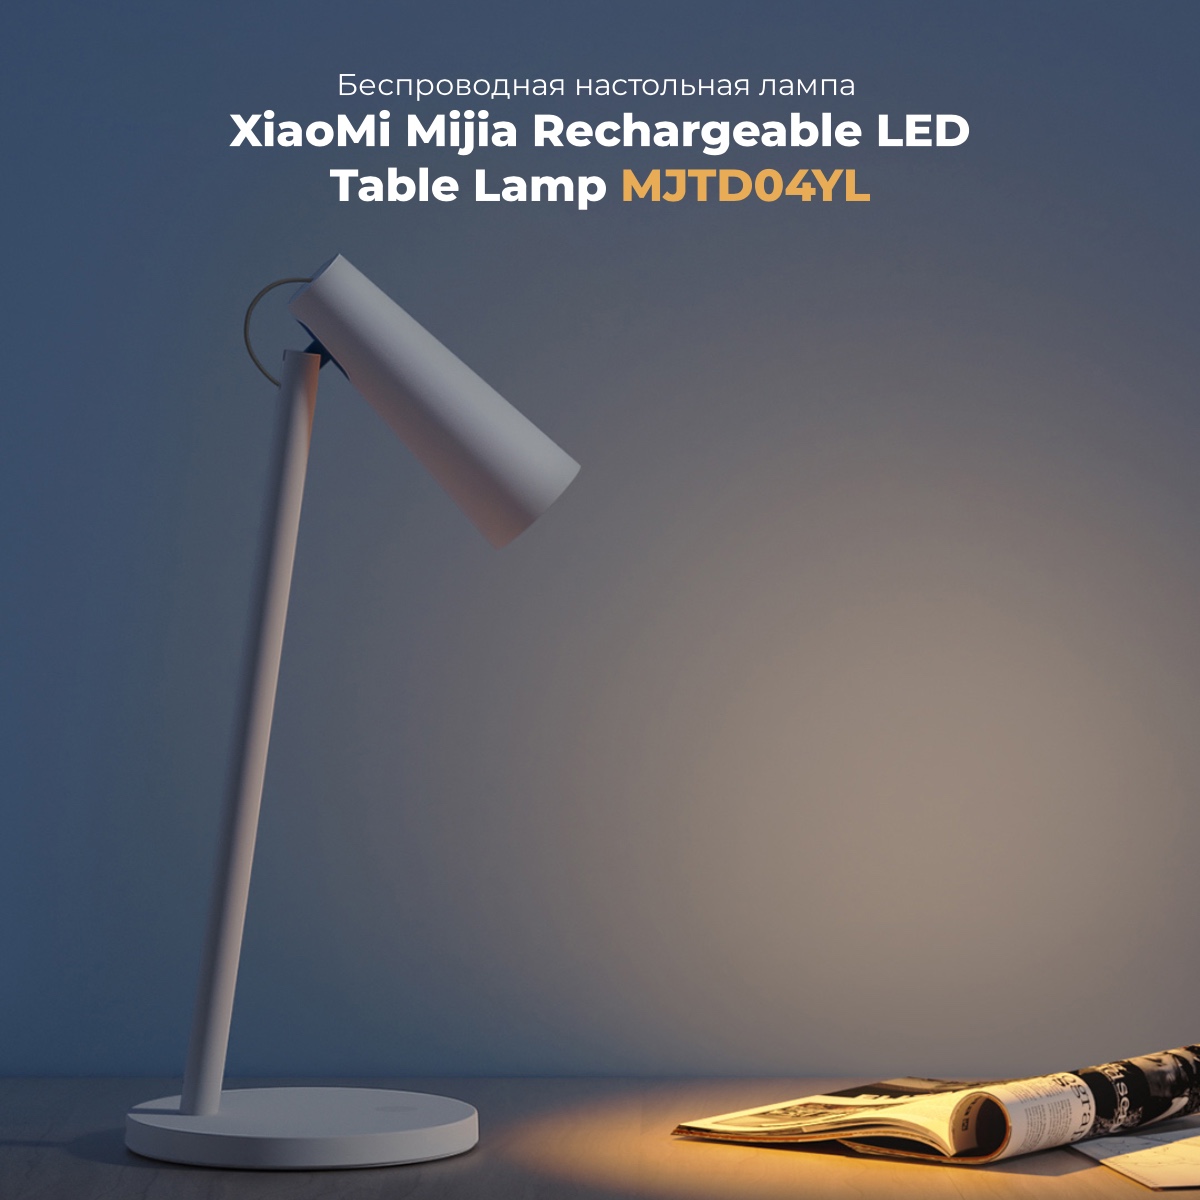 XiaoMi-Mijia-Rechargeable-LED-Table-Lamp-MJTD04YL-01